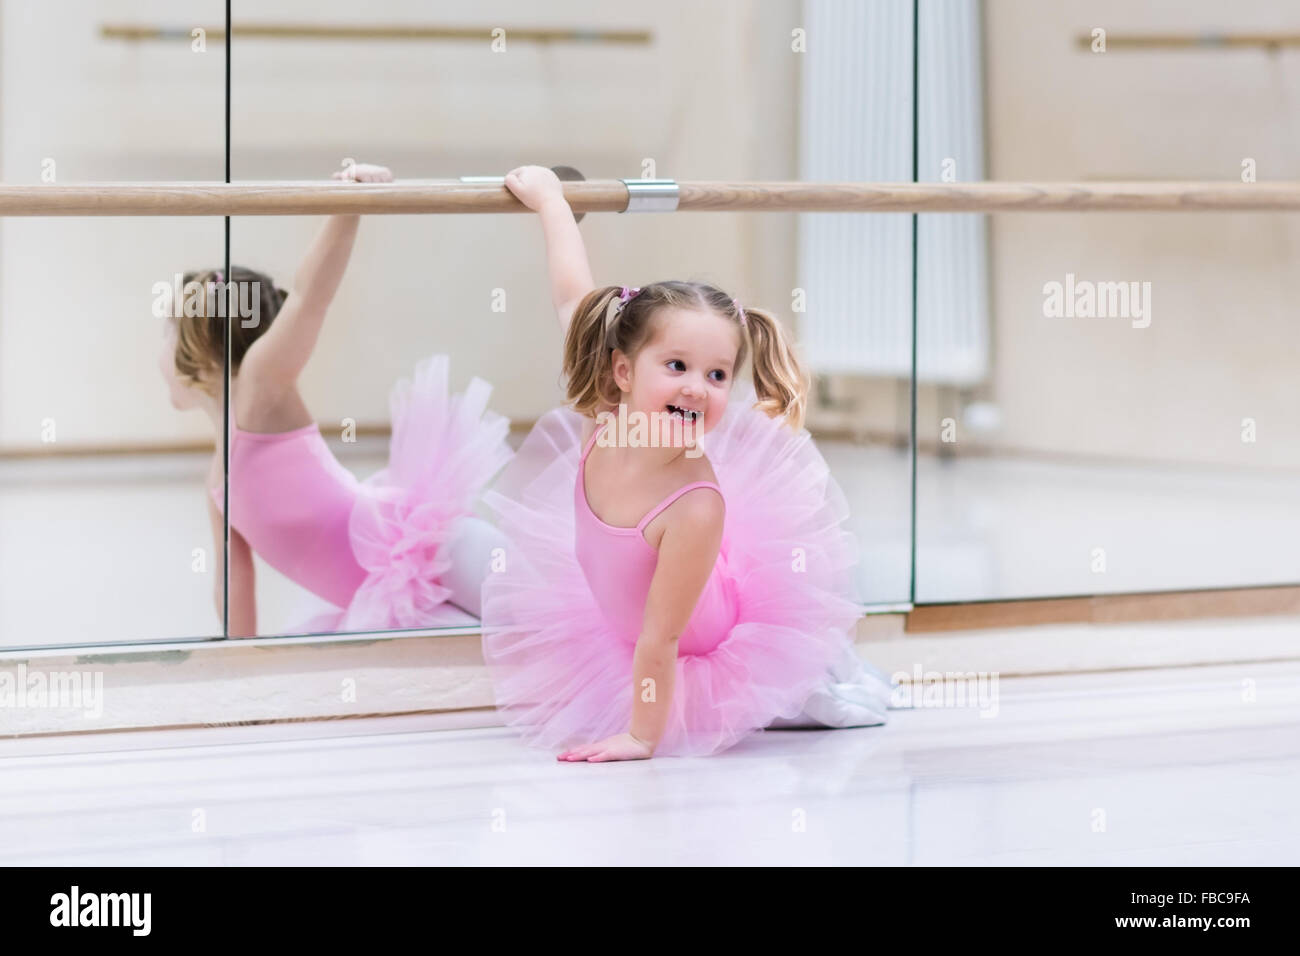 Adorable photo of little ballerina in a lilac dress and white